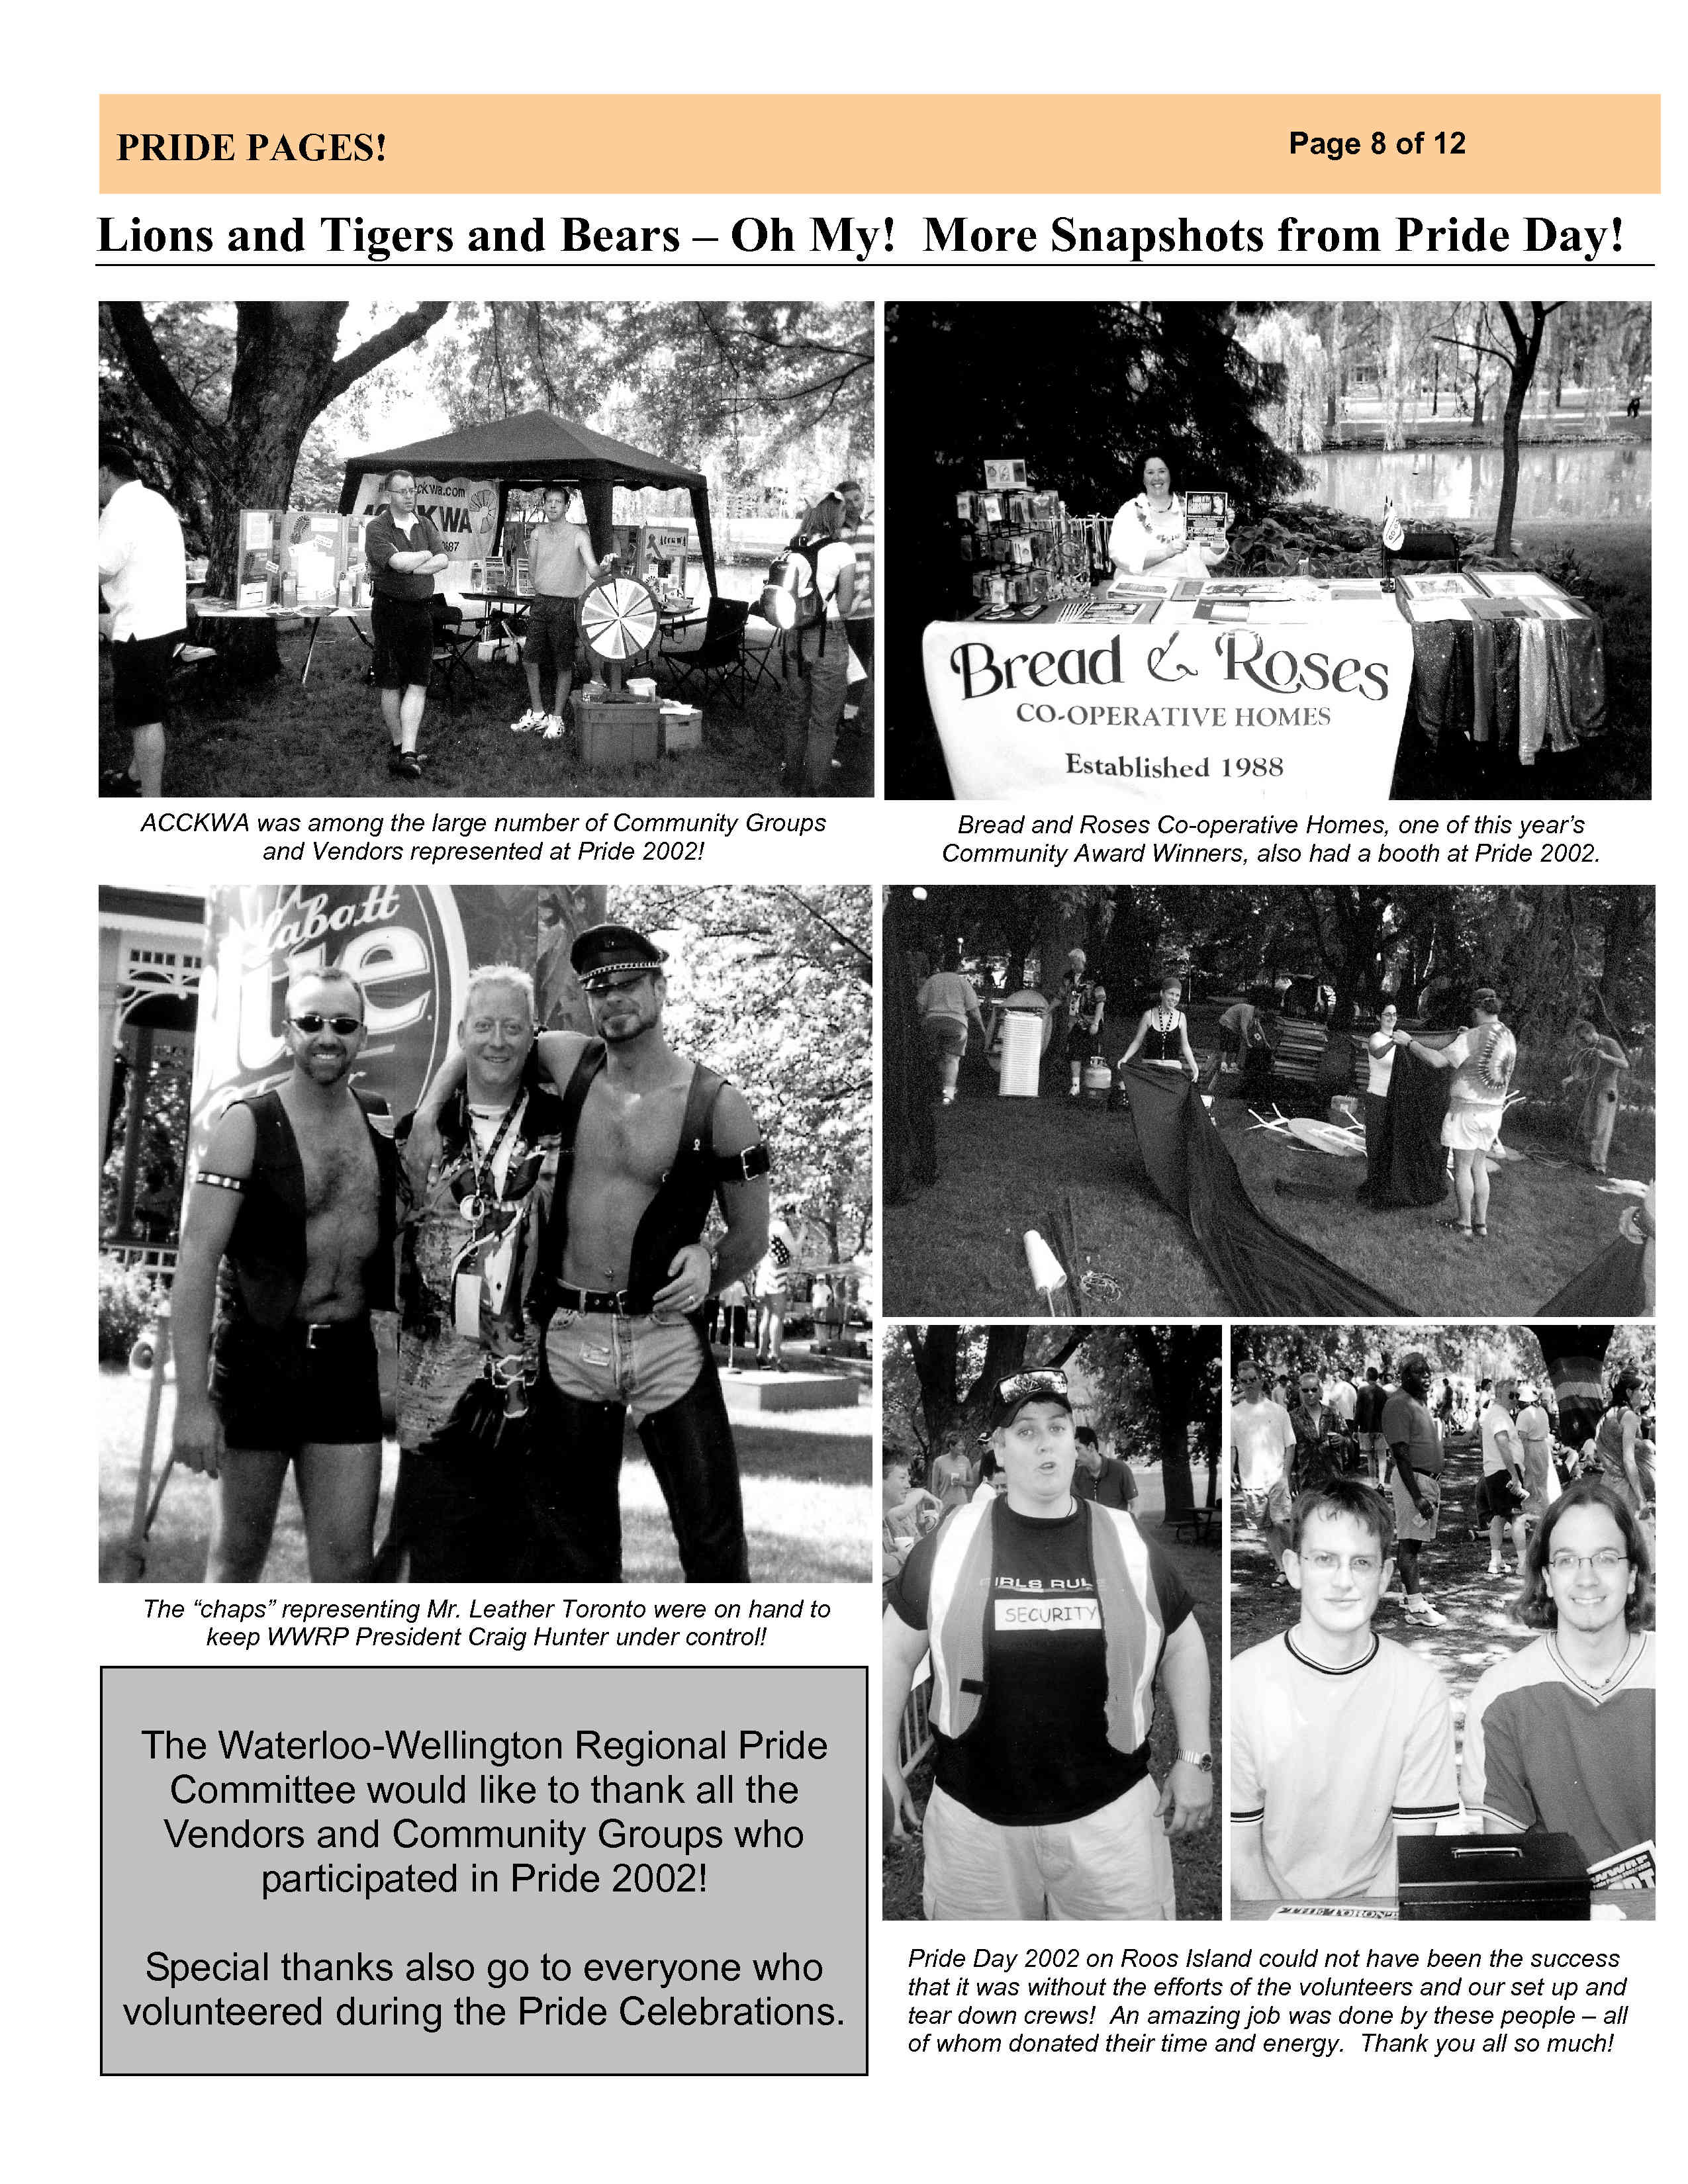 Pride Pages 2002-07 p8